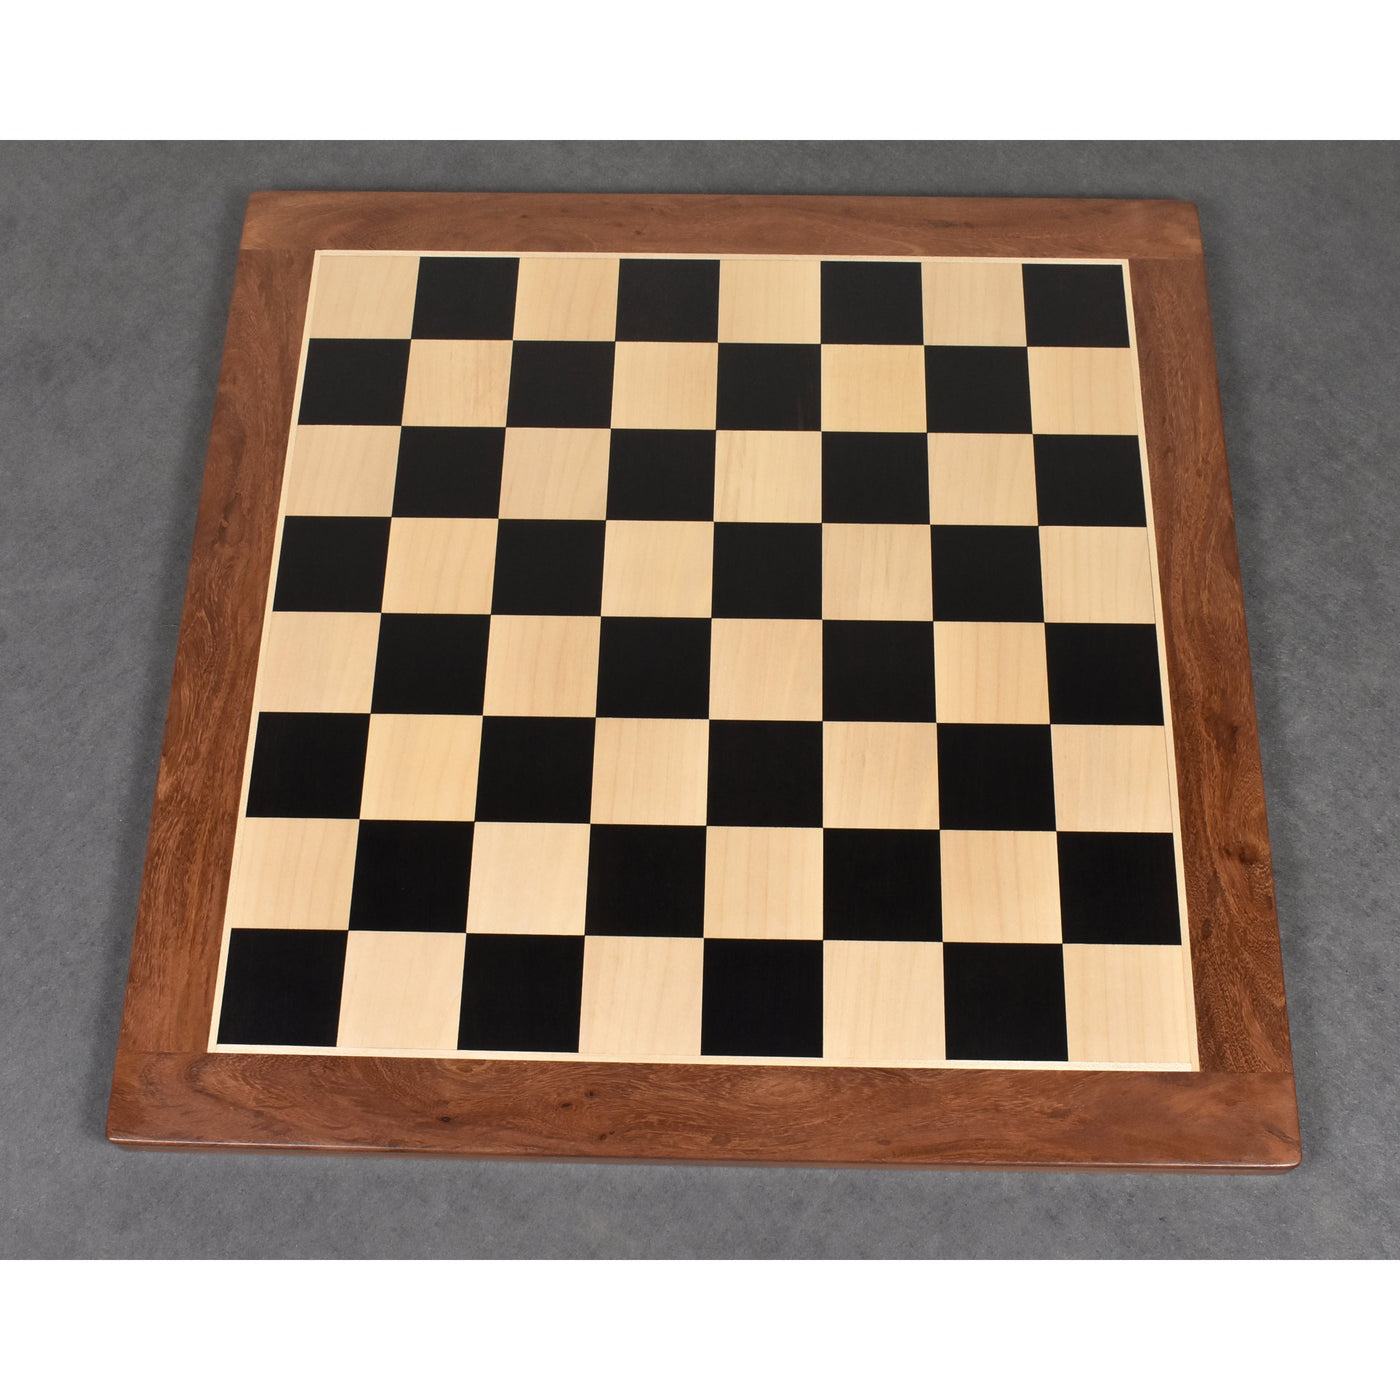 4.5" Reproduced 1849 Staunton Antiqued Boxwood & Ebony Chess Pieces with 23" Ebony & Maple Wood Chessboard and Leatherette Coffer Storage Box